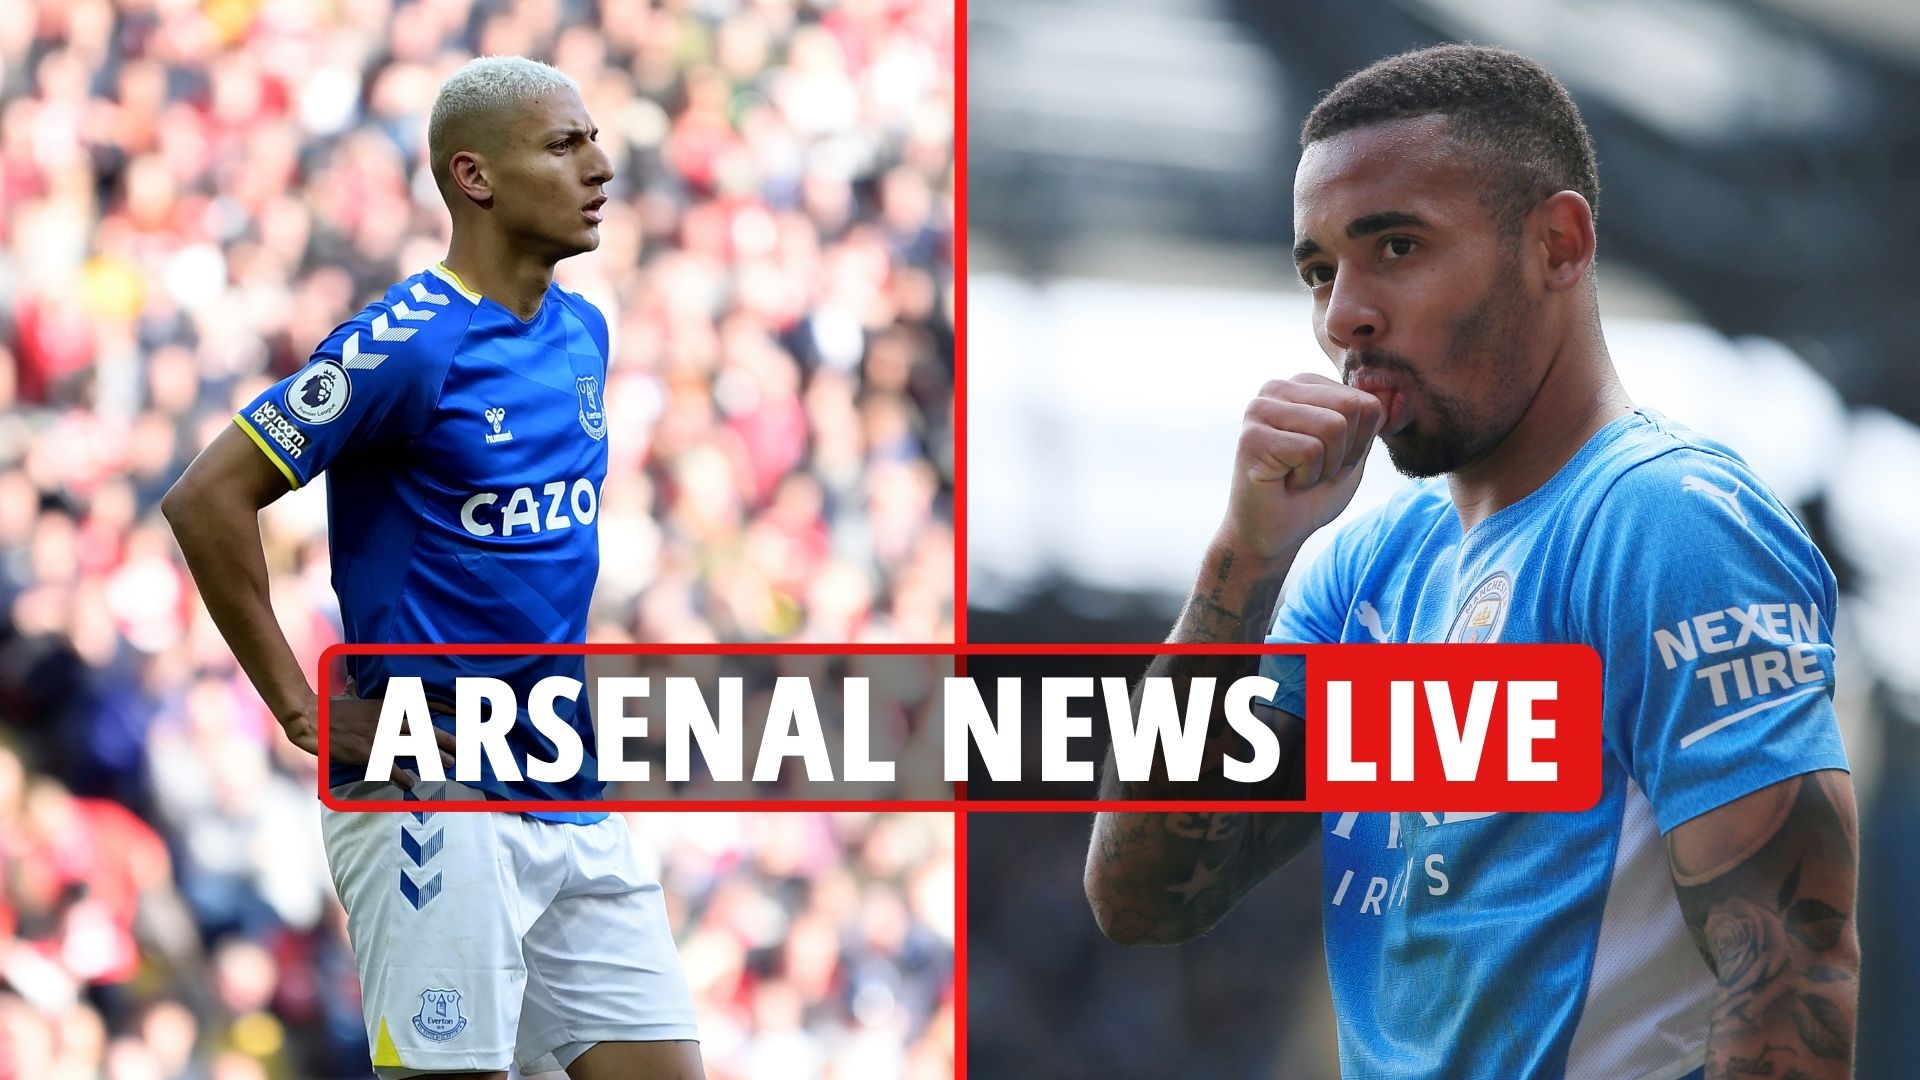 Arsenal news LIVE: latest gossip and transfer news from the Emirates